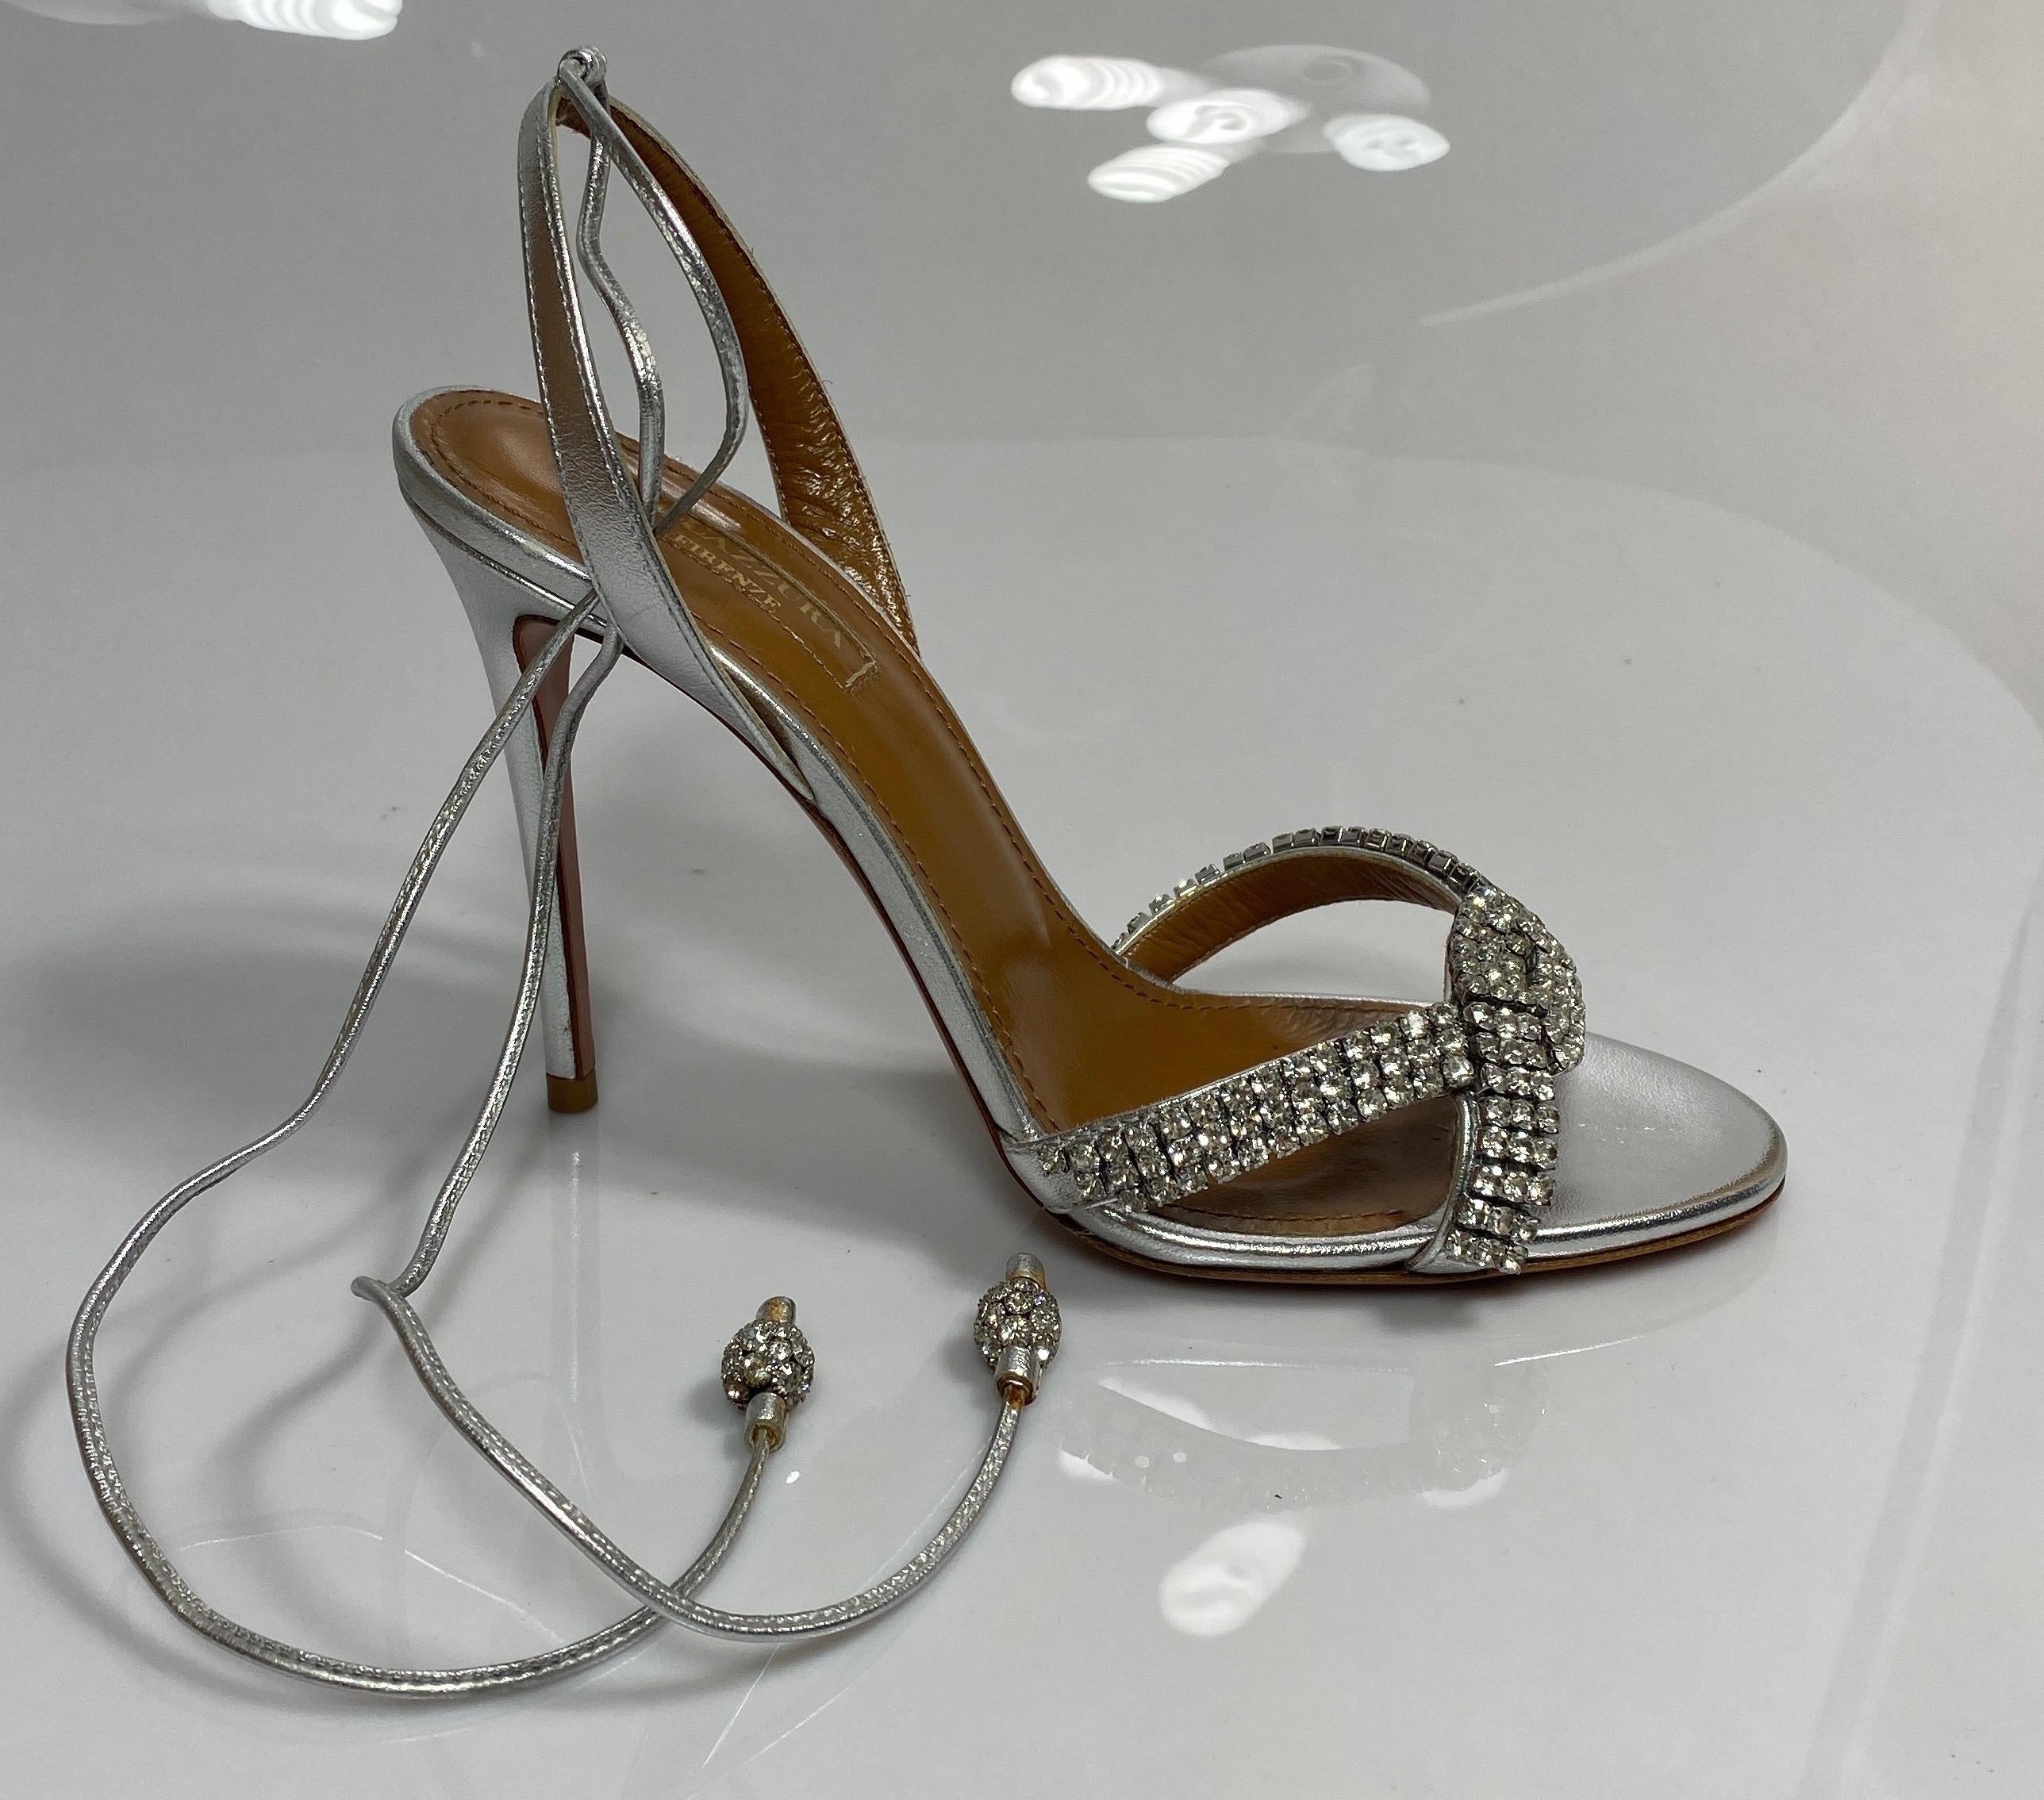 Aquazurra Silver “Dazzling Sandal” with crystals-Size 36
Description:
Rhinestone embellished sandal
Criss cross strap in front
Leather lace ankle tie with rhinestone balls on end
4.5” heel height
Excellent condition
